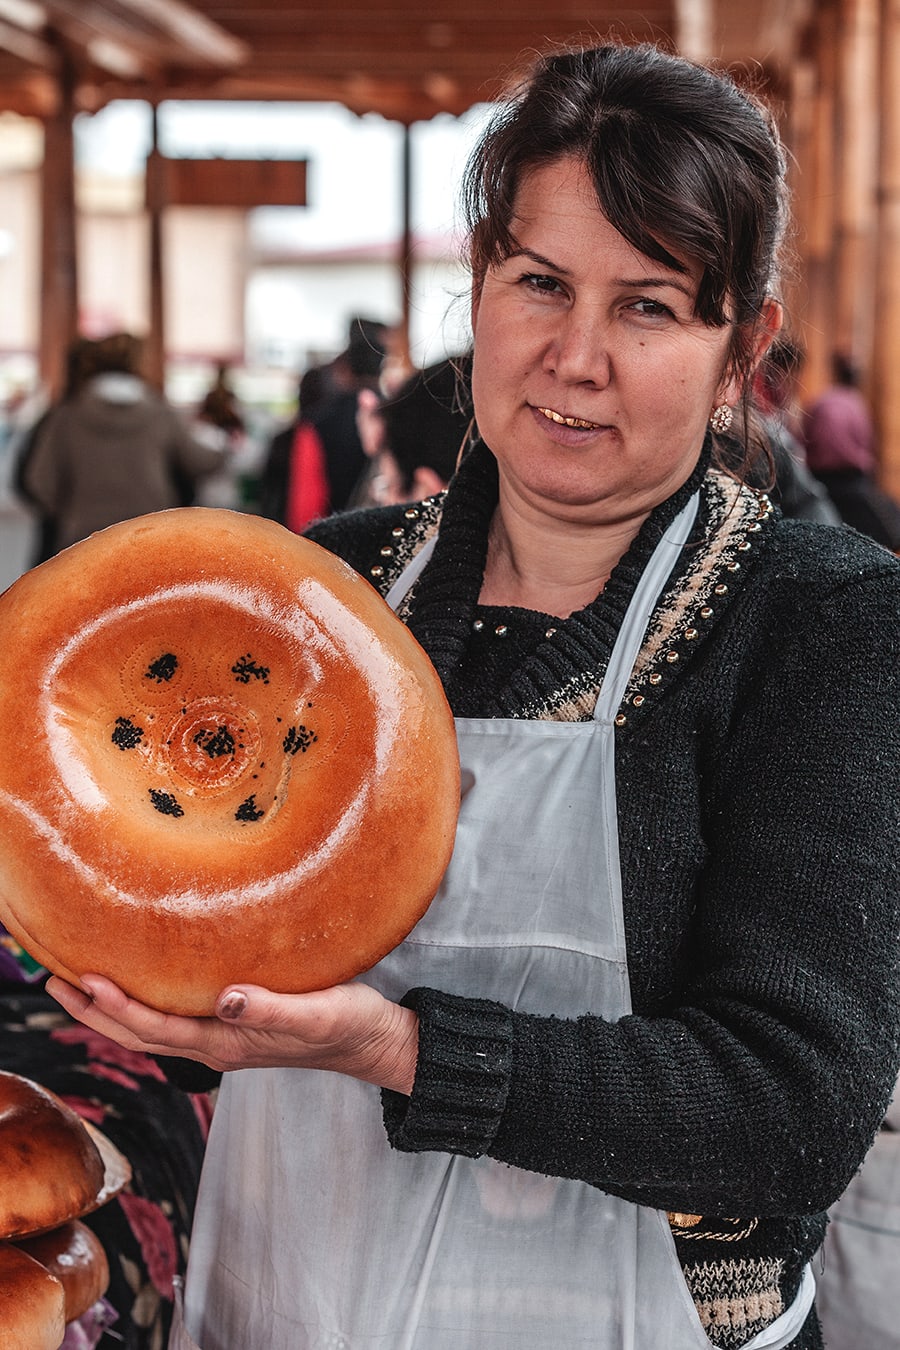 A bread vendor at the Samarkand market proudly shows her wares.